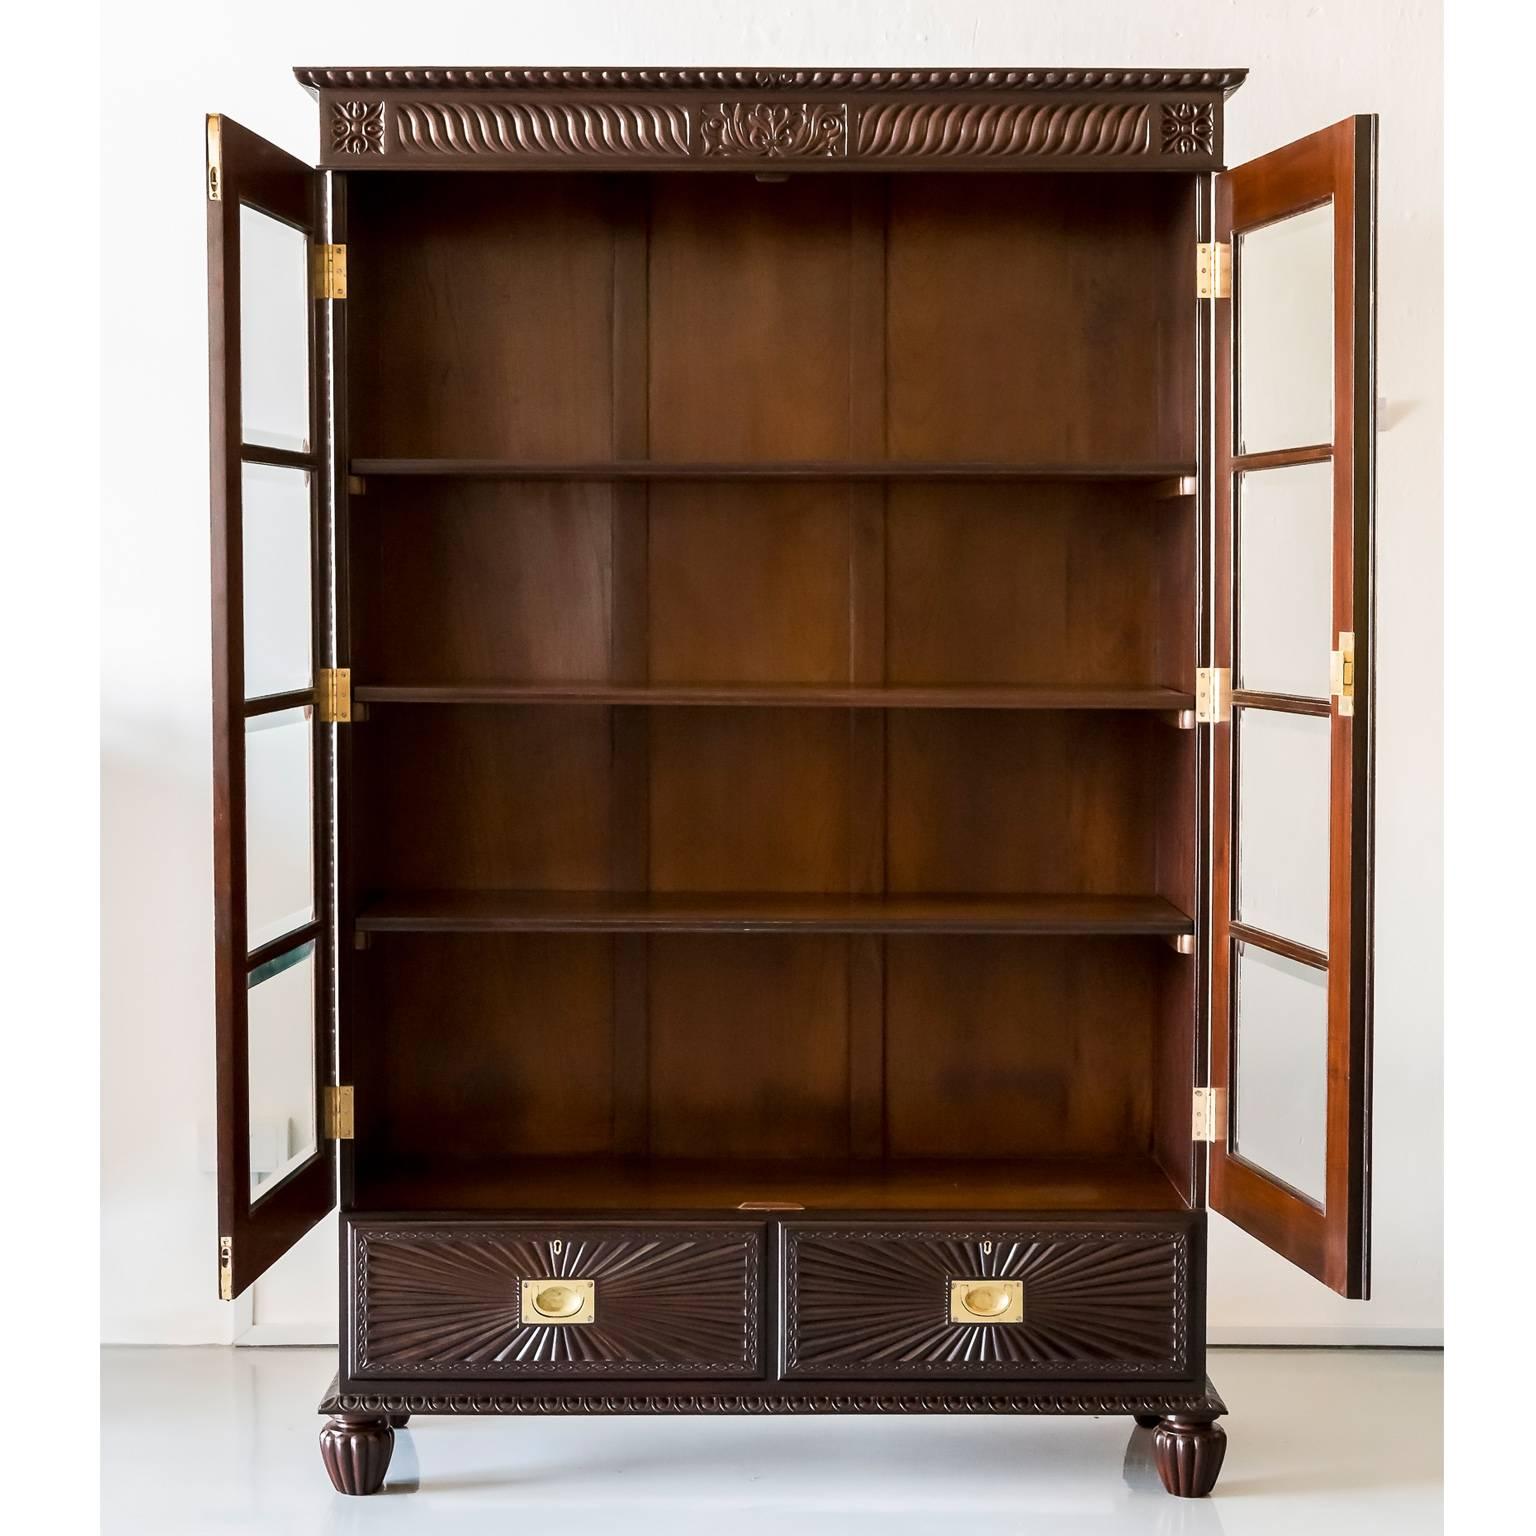 19th Century Antique Anglo-Indian or British Colonial Rosewood Bookcase